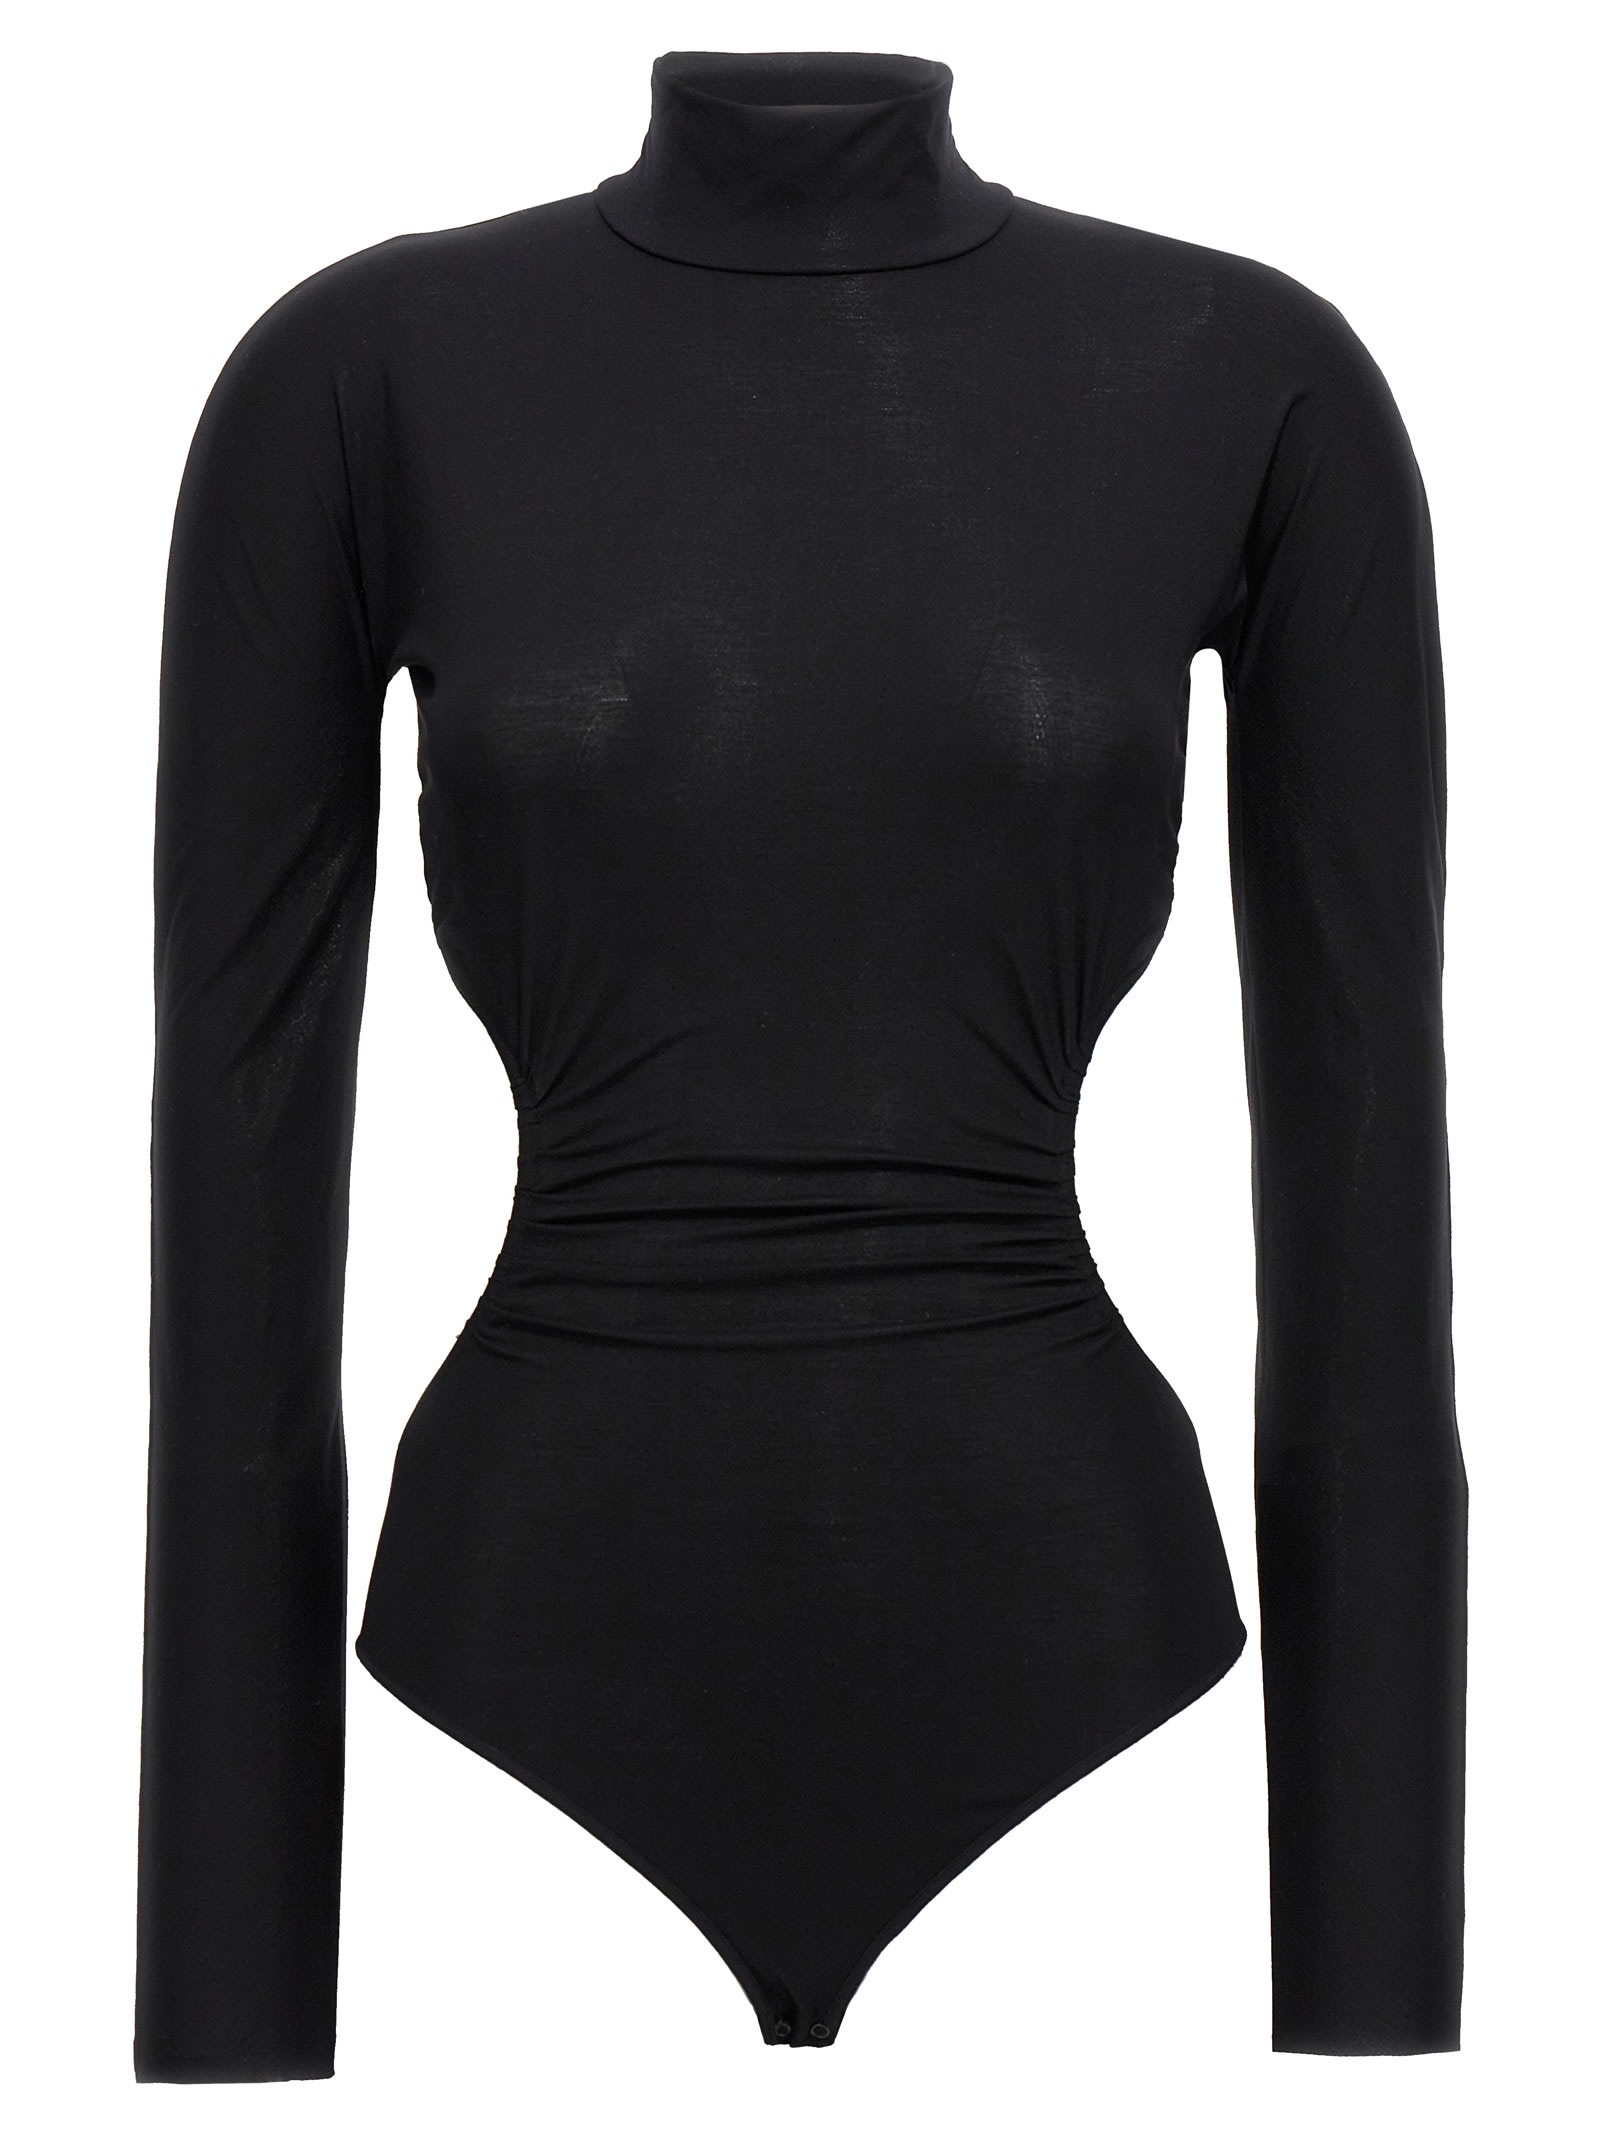 Regular Size L Wolford Bodysuits for Women for sale